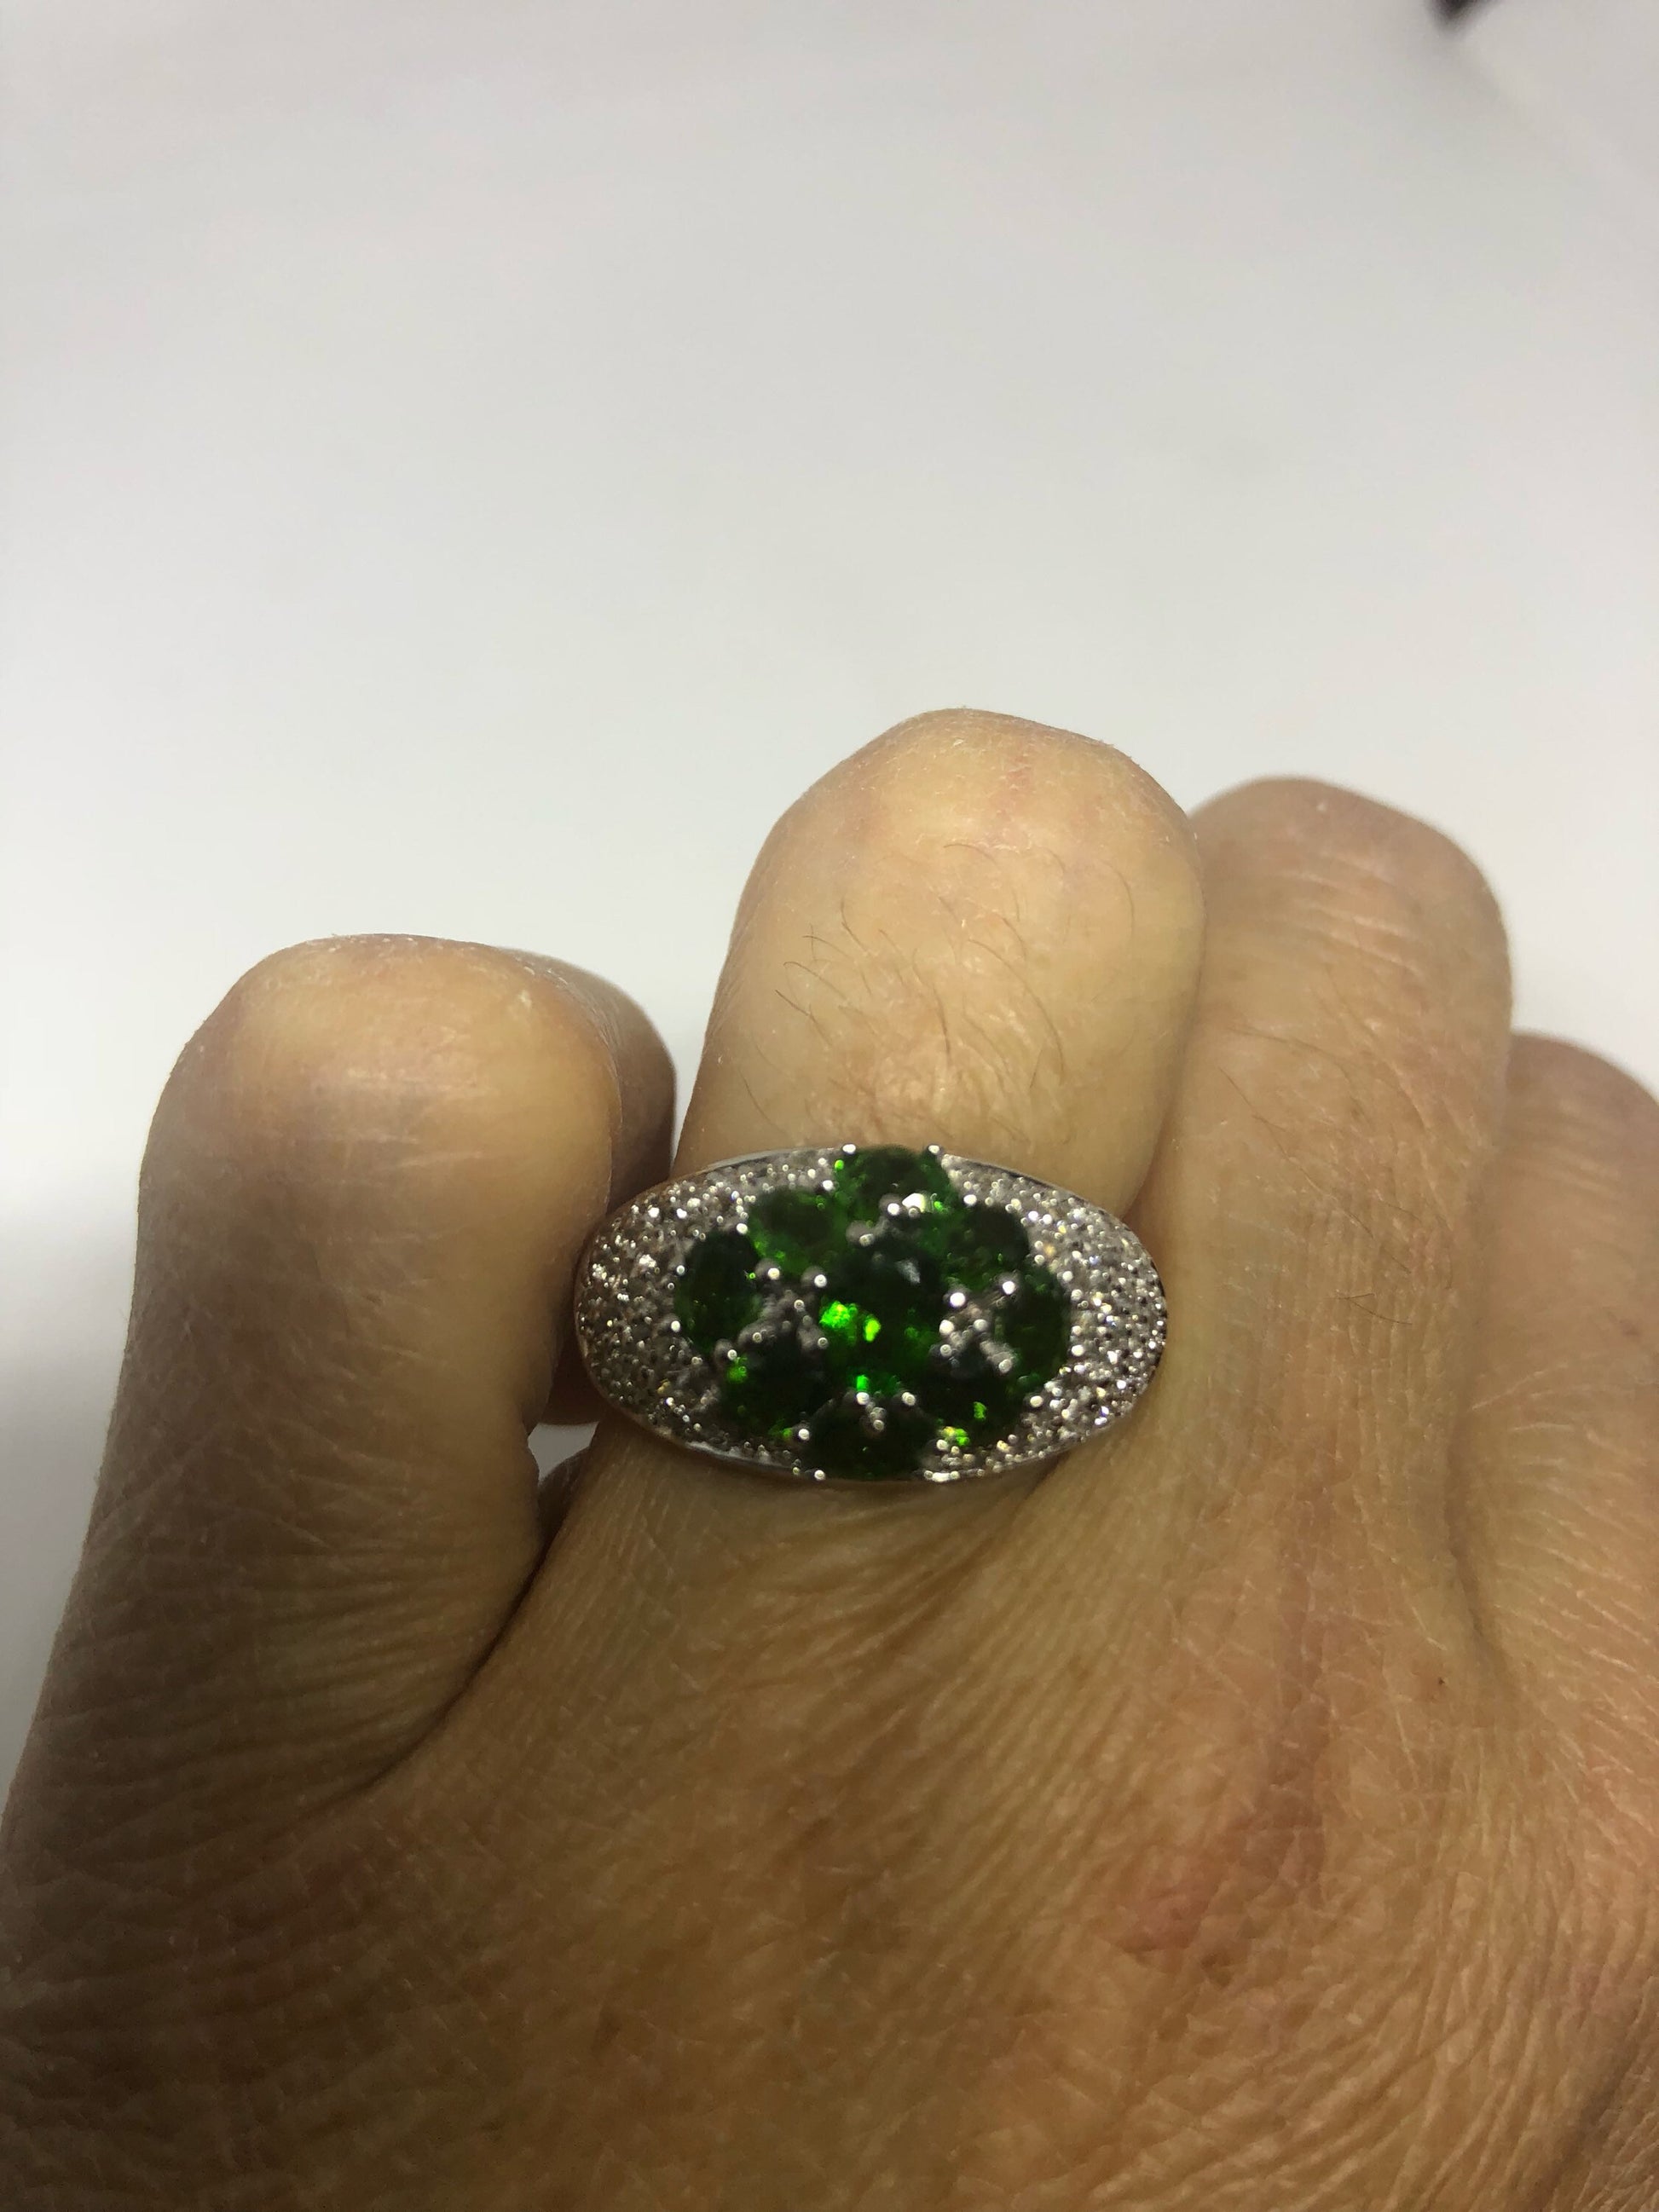 Vintage Handmade Green Chrome Diopside Filigree Setting Sterling Silver Gothic Ring